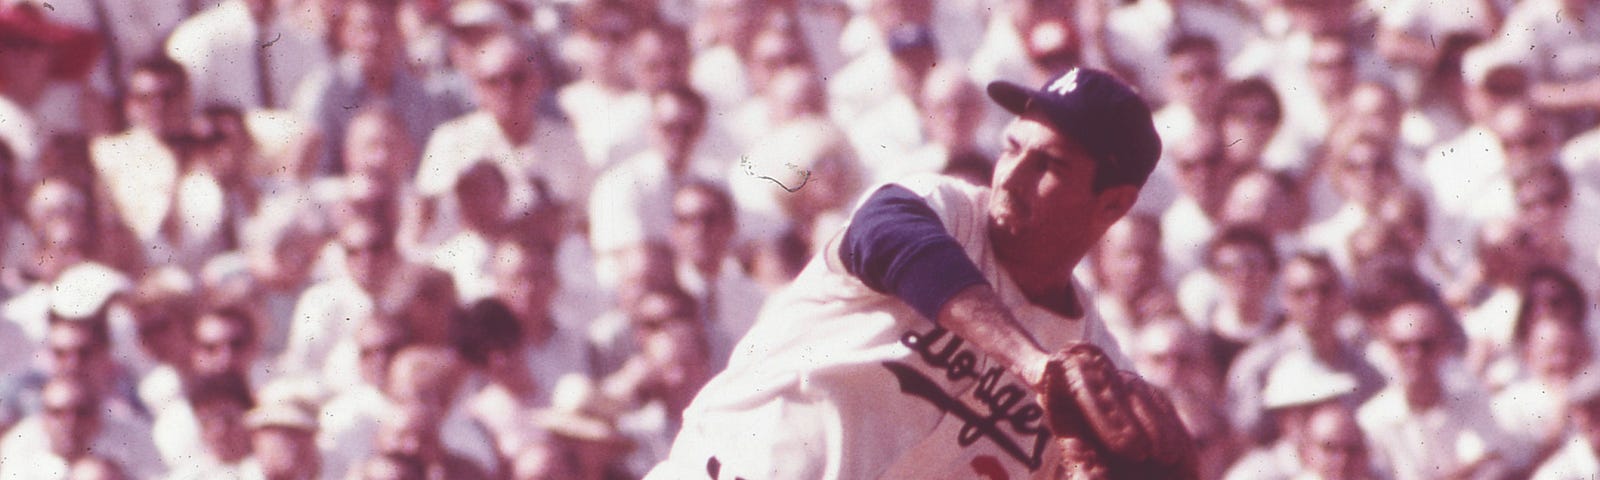 OTD: Koufax throws LA Dodgers' first no-hitter against expansion Mets, by  Mark Langill